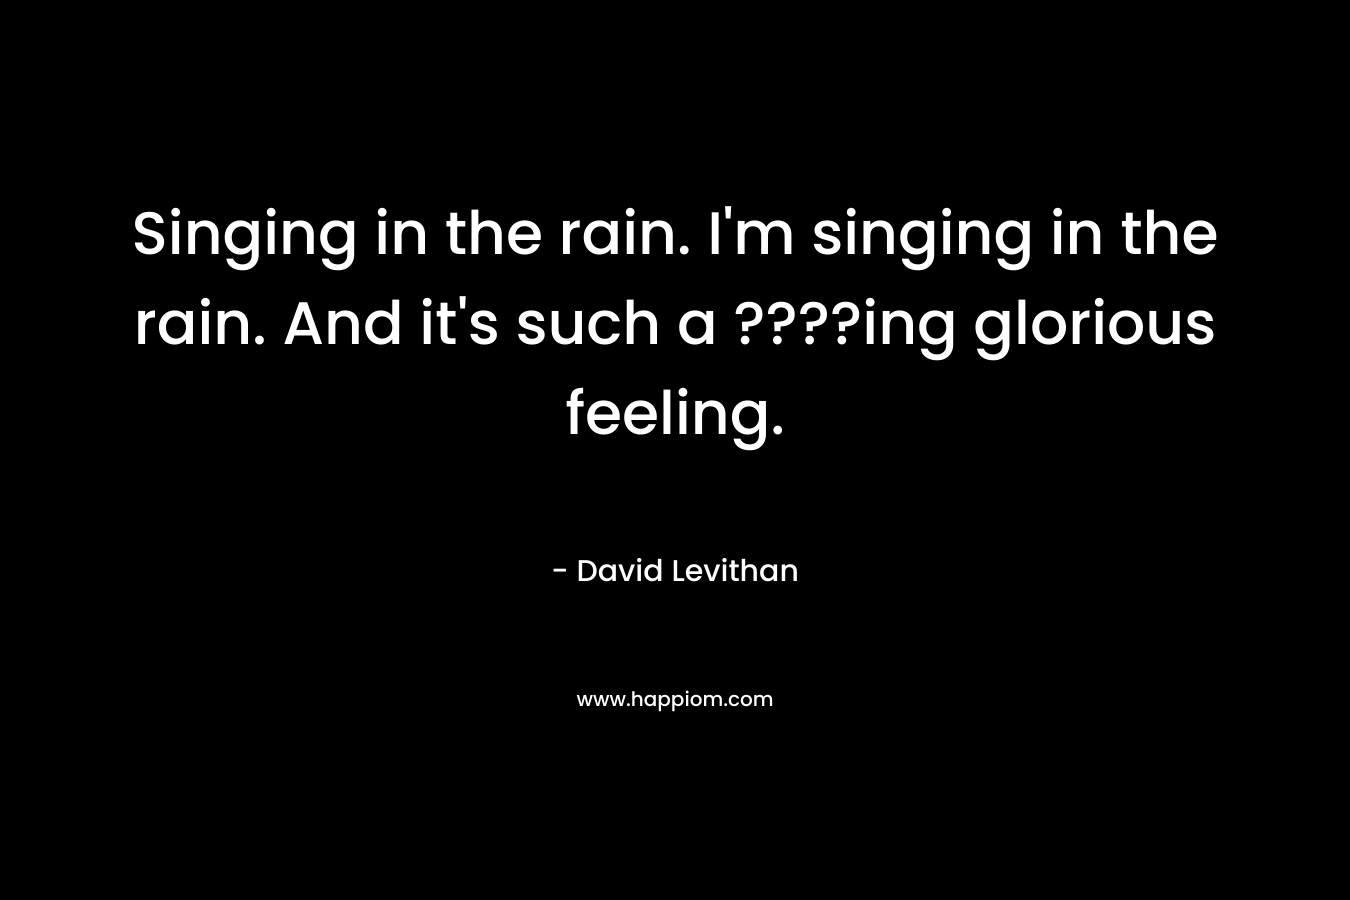 Singing in the rain. I'm singing in the rain. And it's such a ????ing glorious feeling.